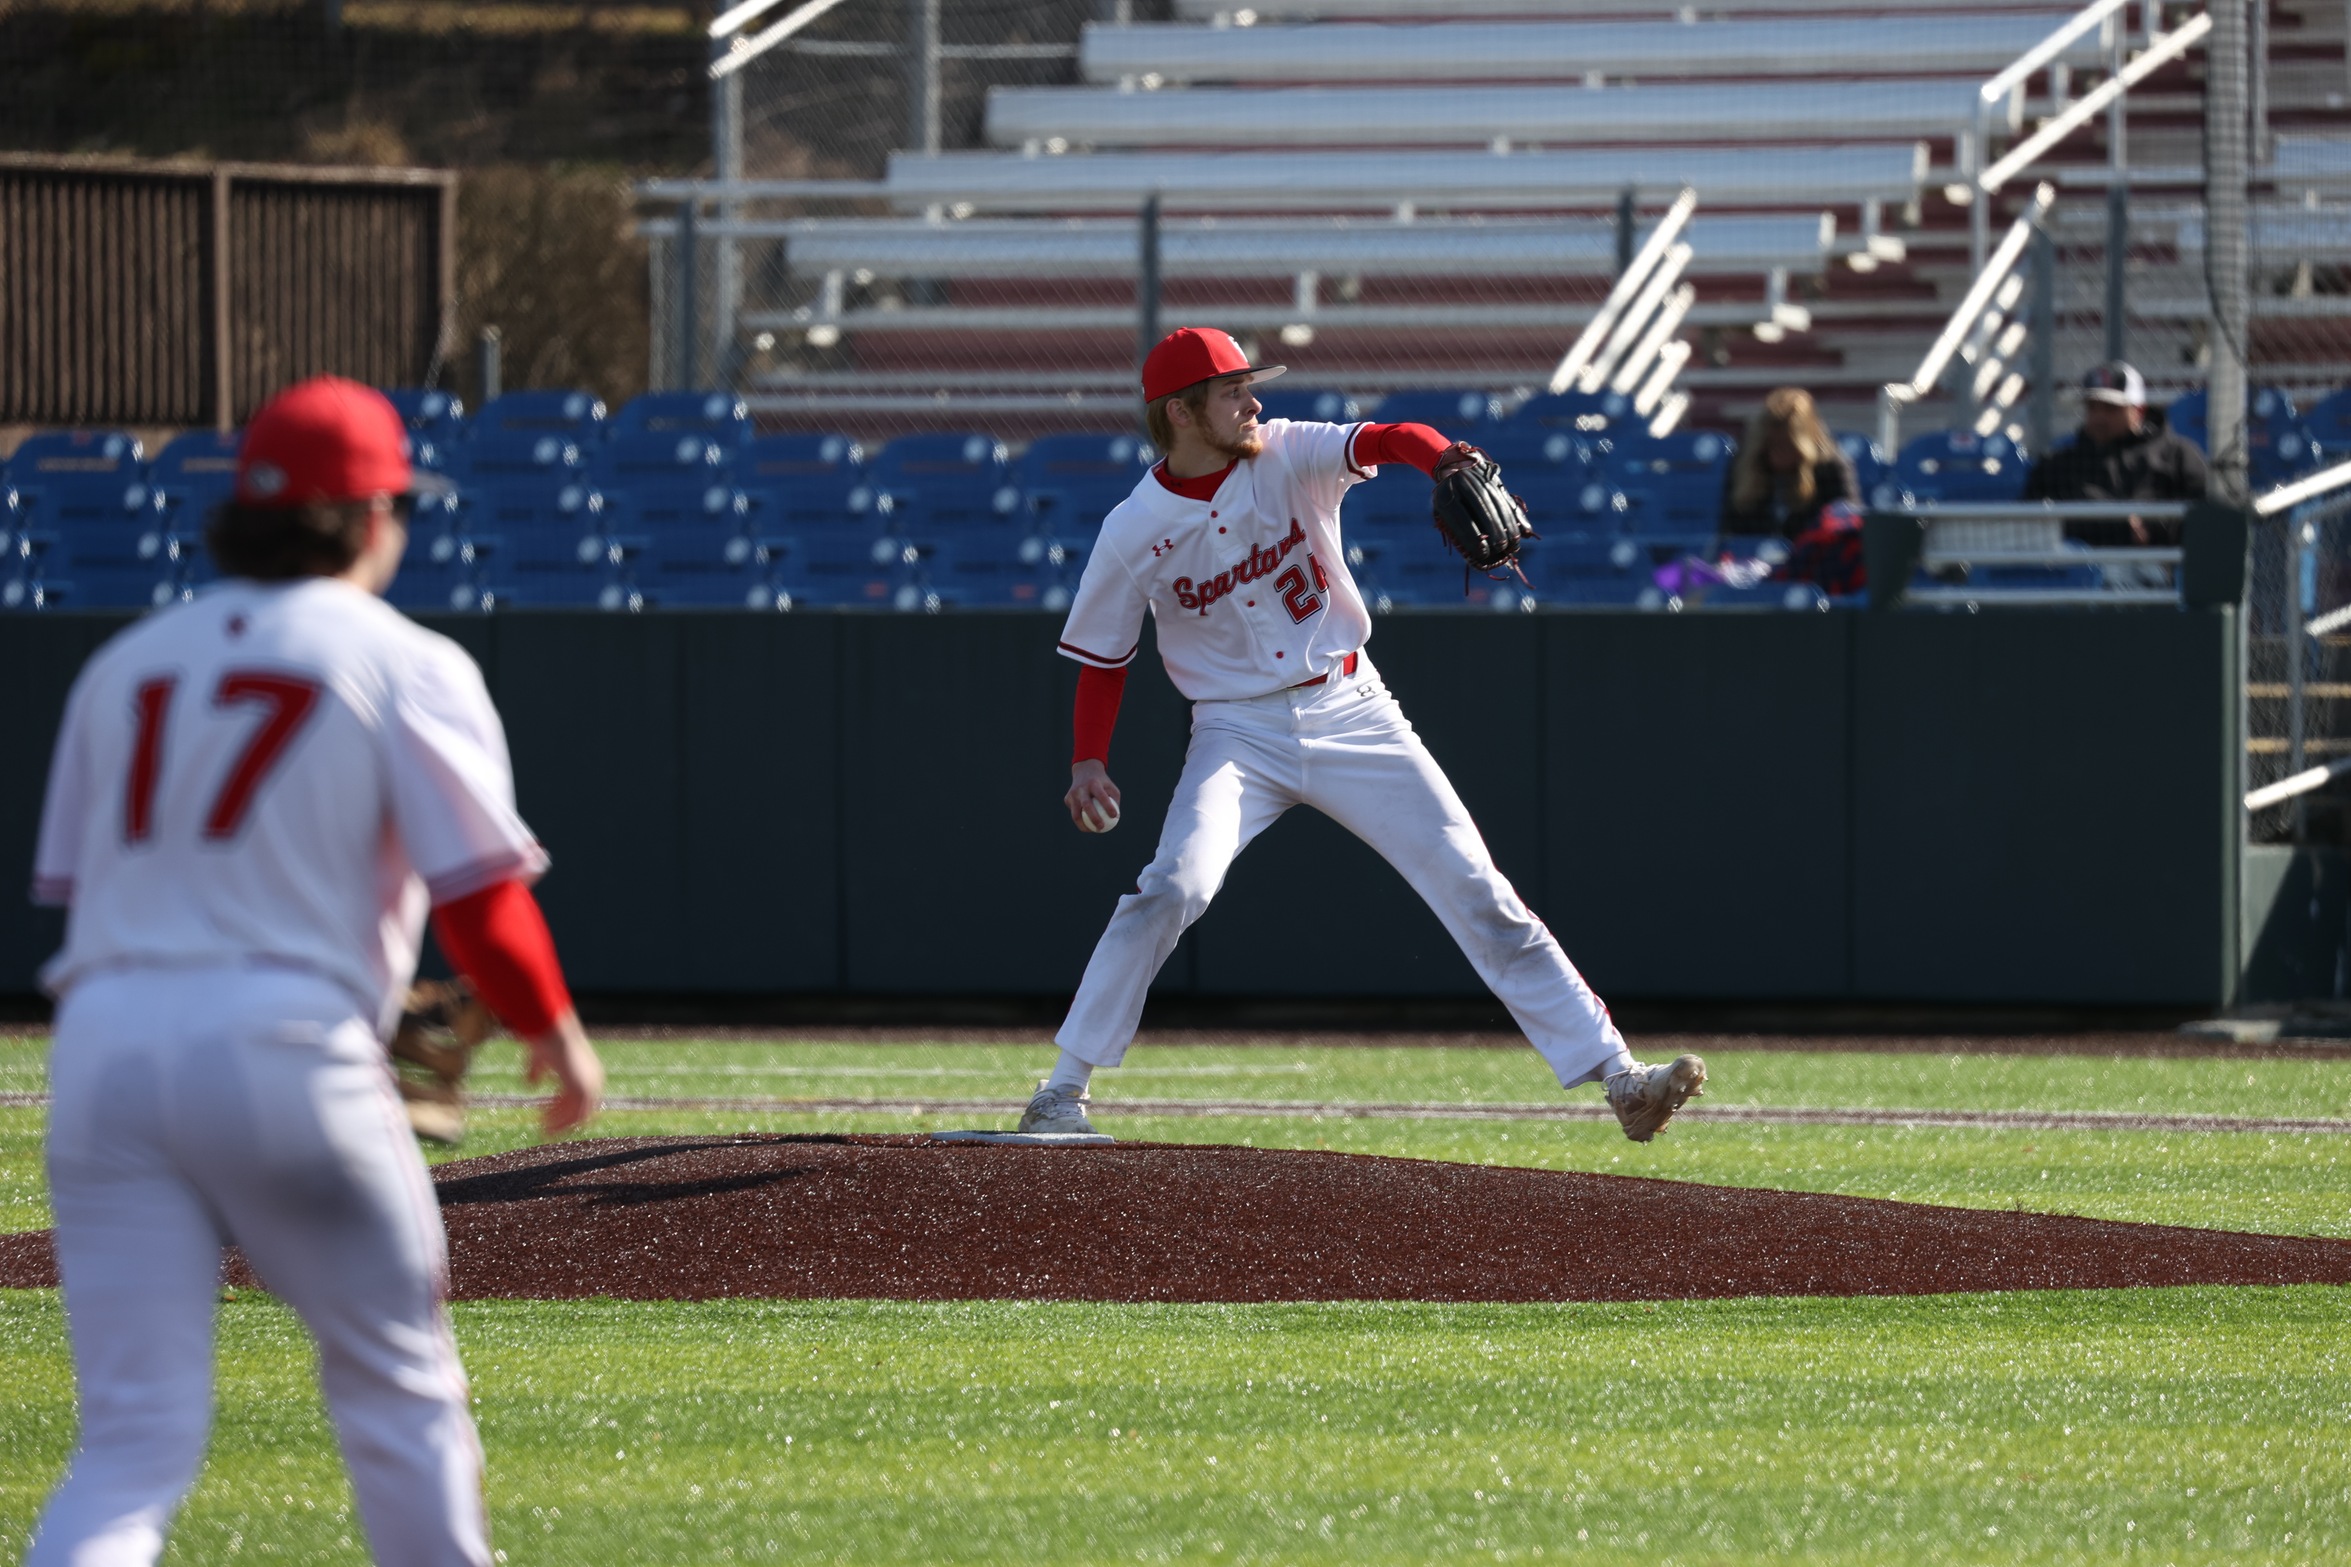 Austin Miller threw six shutout innings to earn the win against SUNY Adirondack on Saturday.